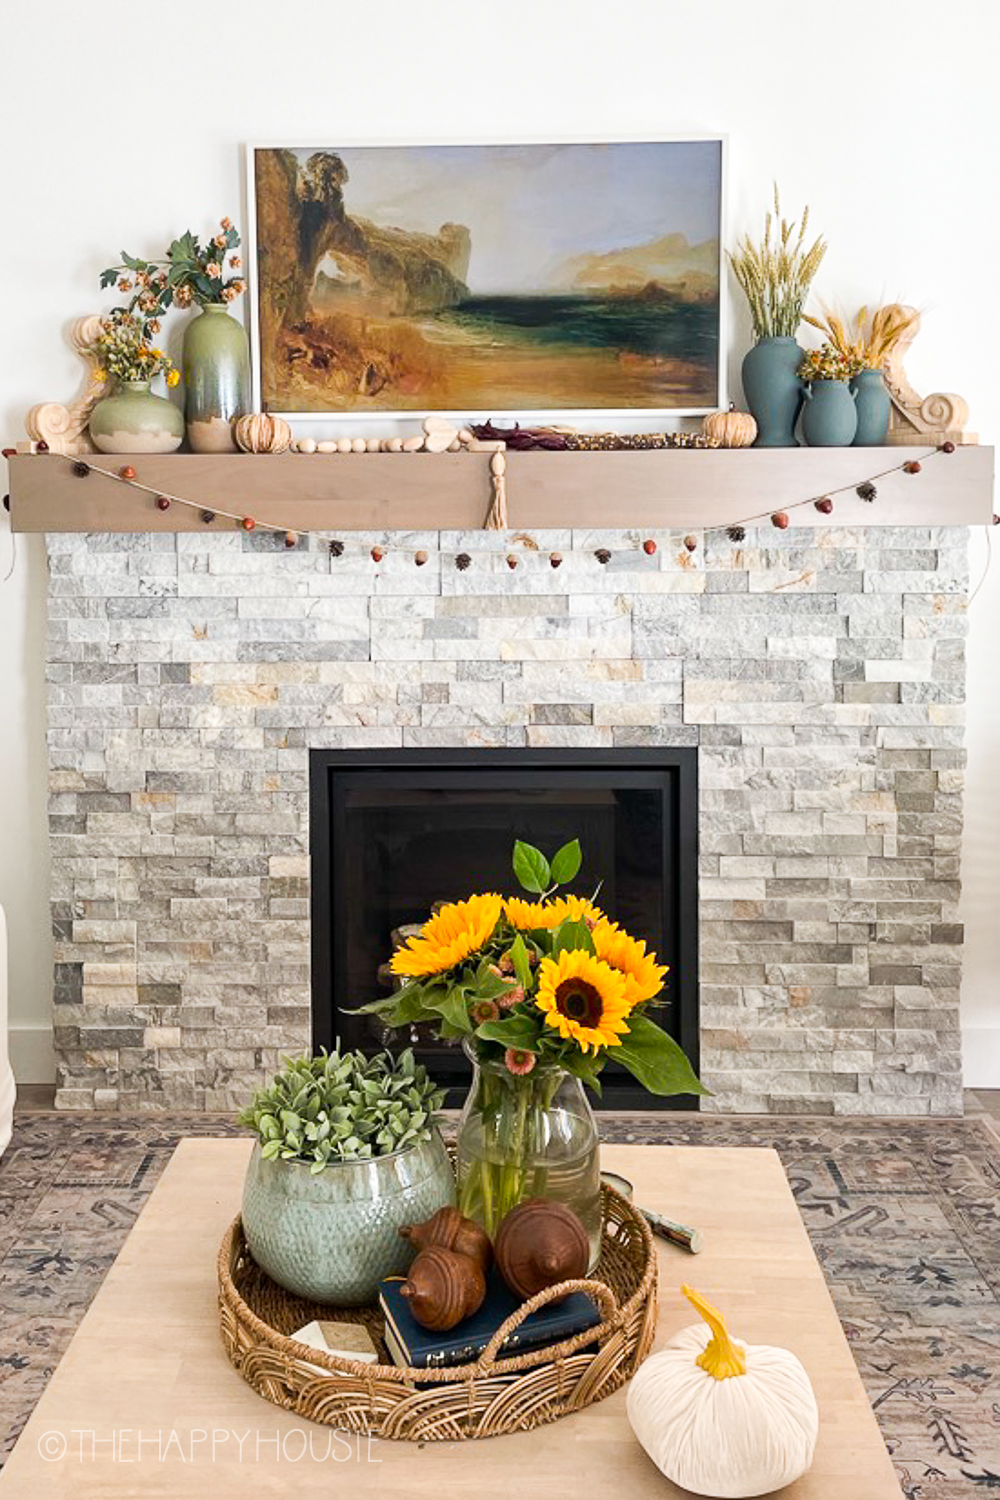 A banner of acorns is strung around the fireplace mantel.